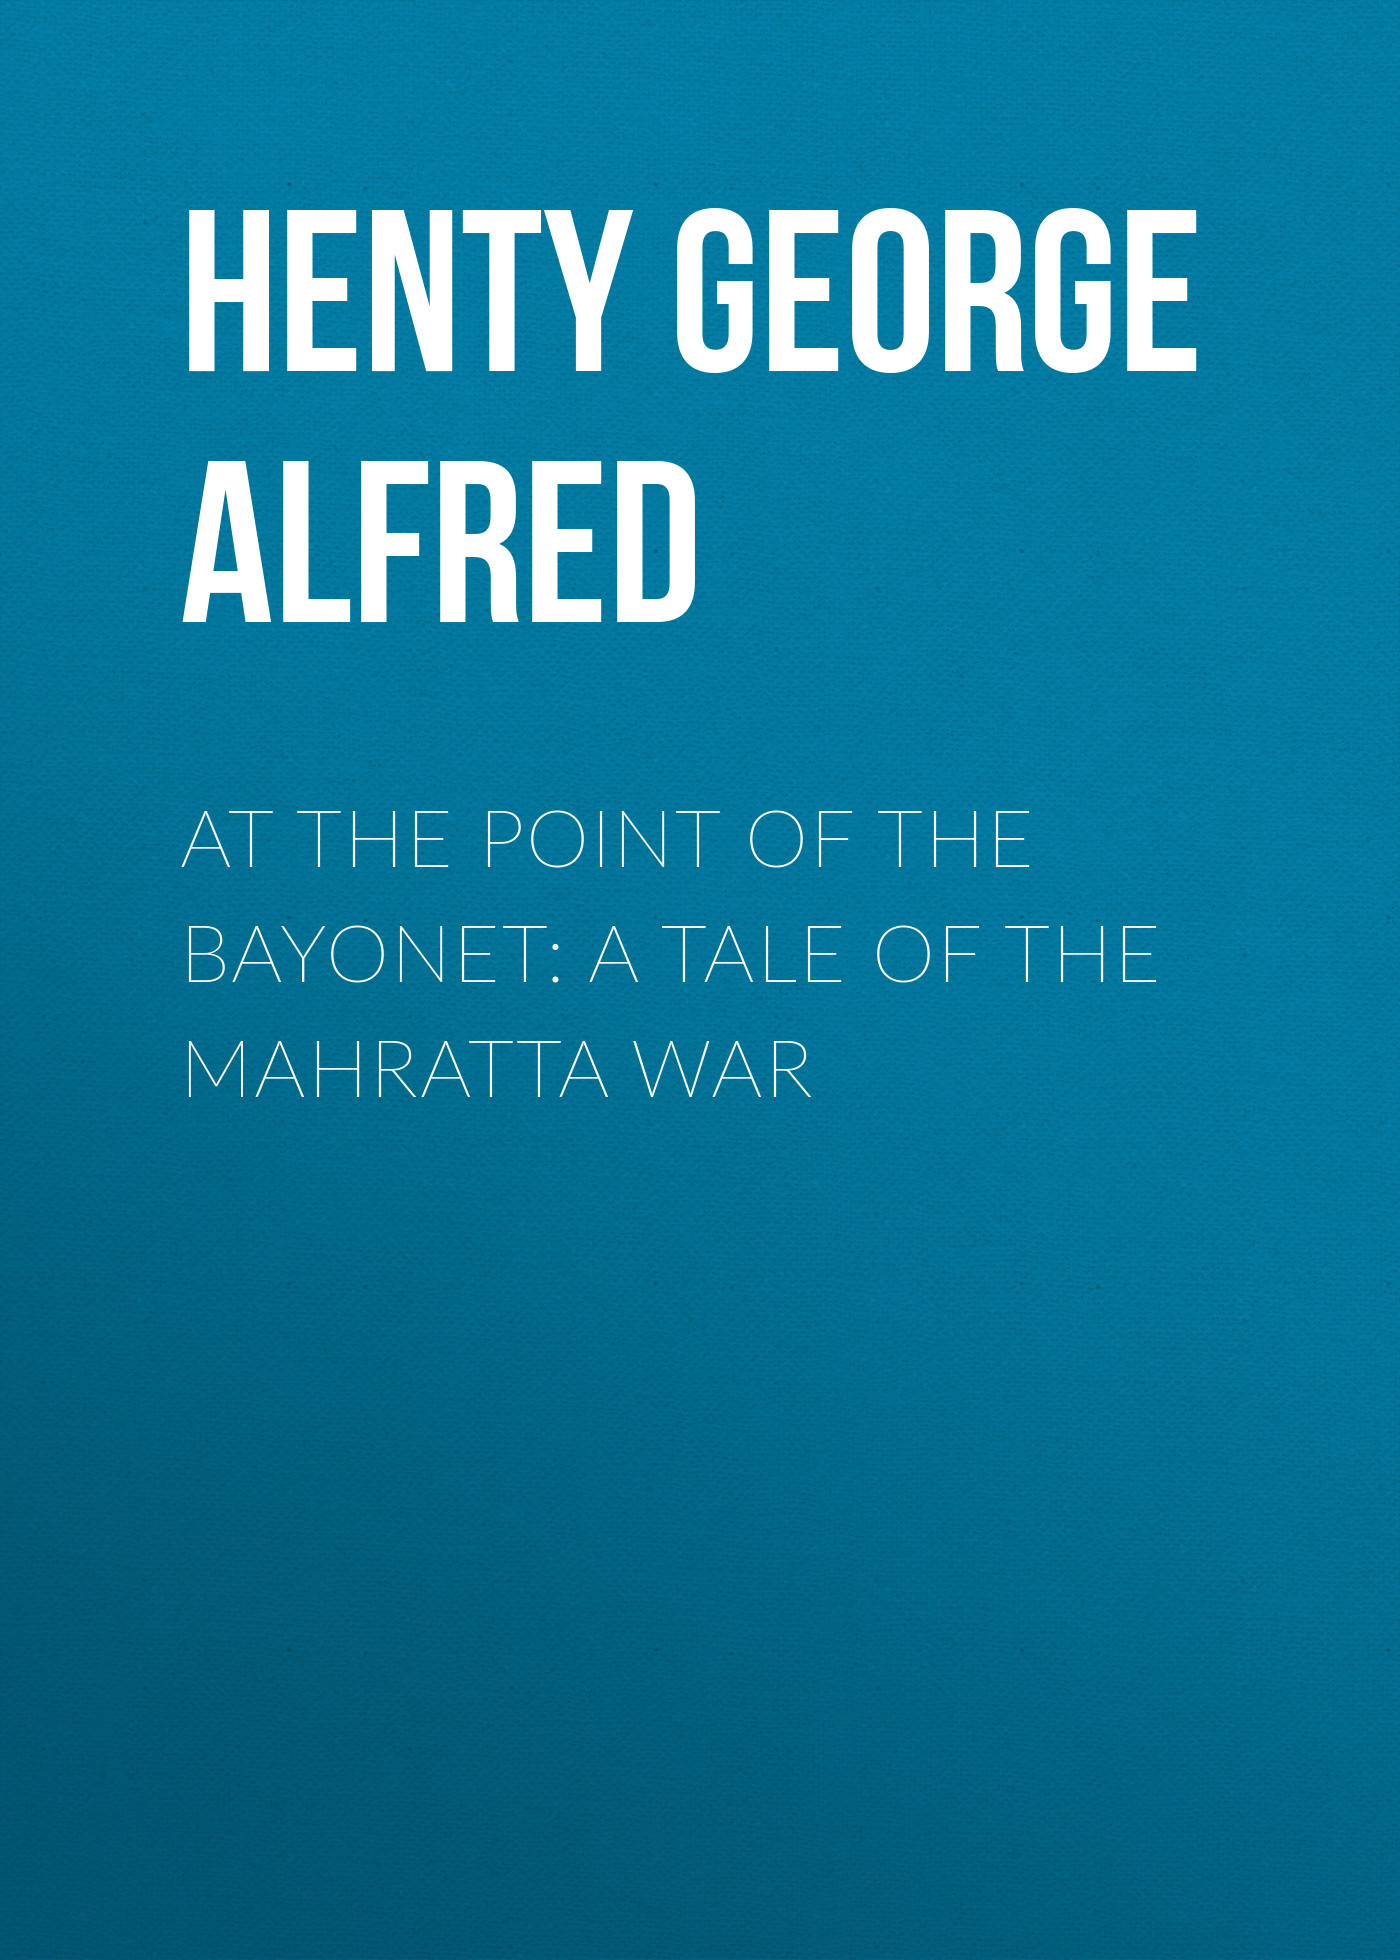 Скачать At the Point of the Bayonet: A Tale of the Mahratta War - Henty George Alfred